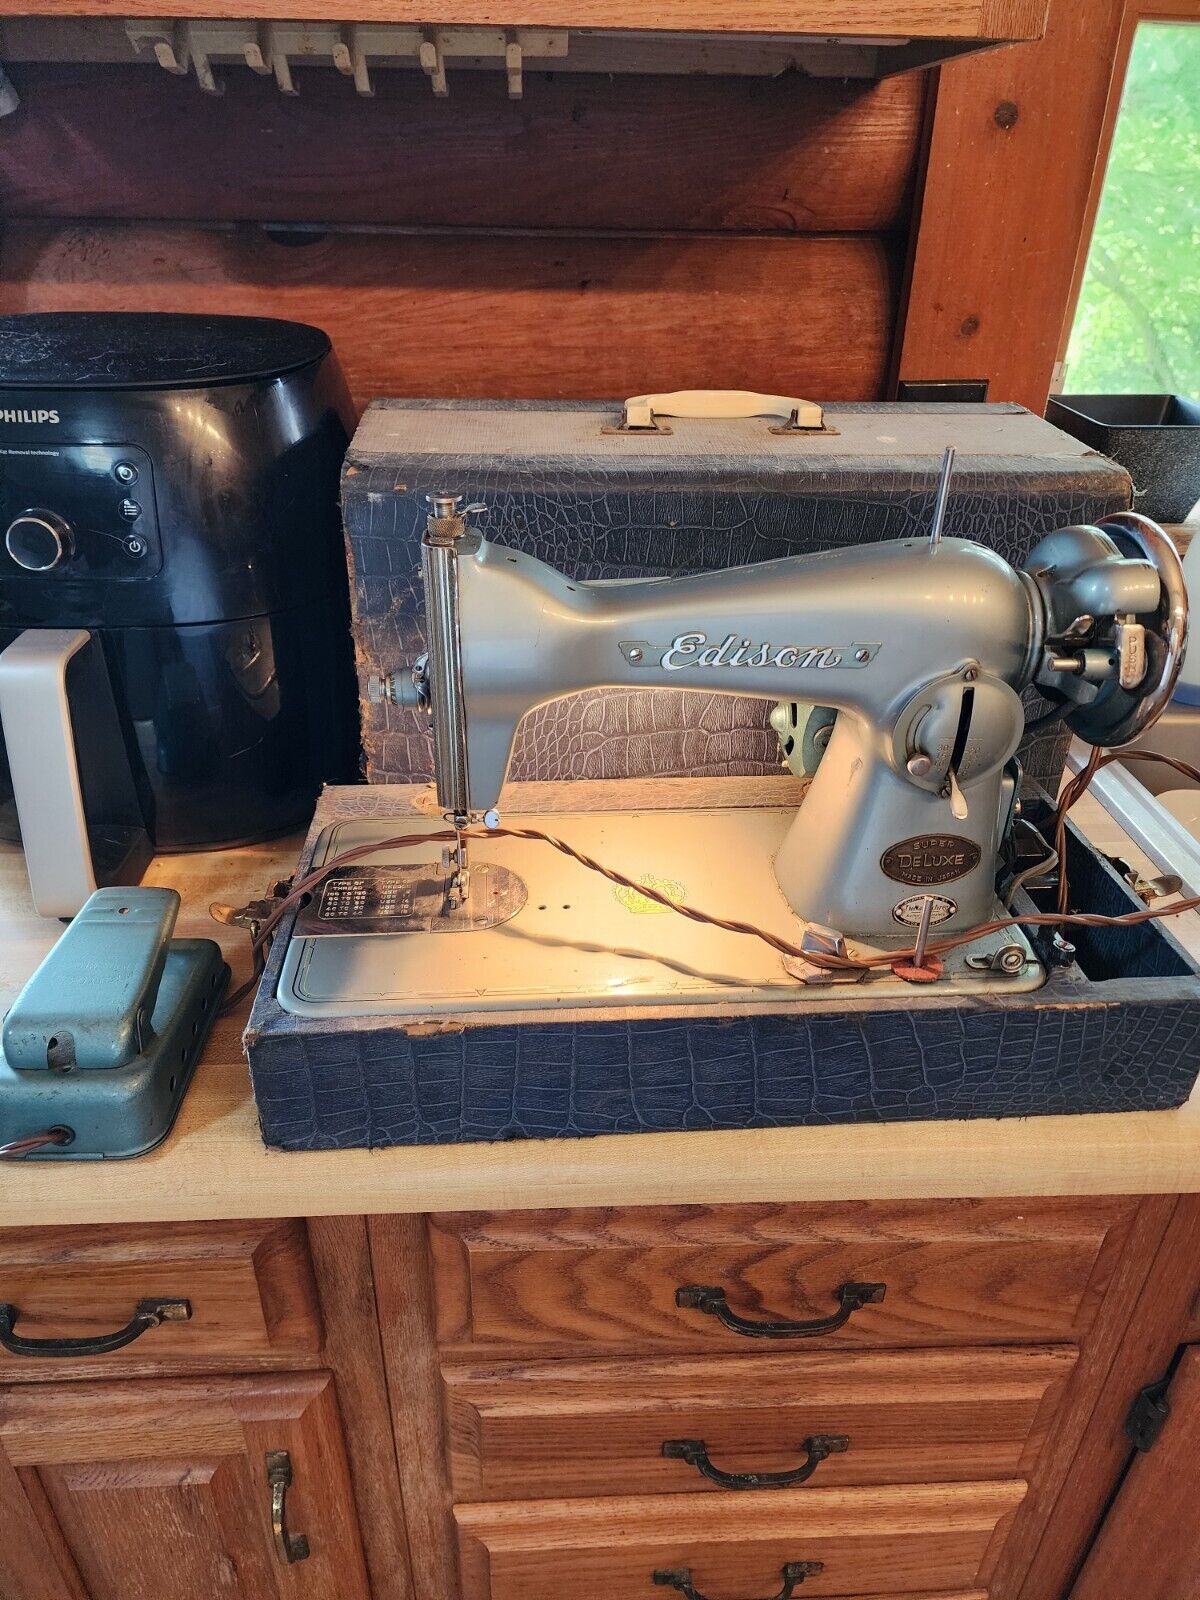 General Vintage Super Deluxe Sewing Machine Working Made In Japan w/case pedal